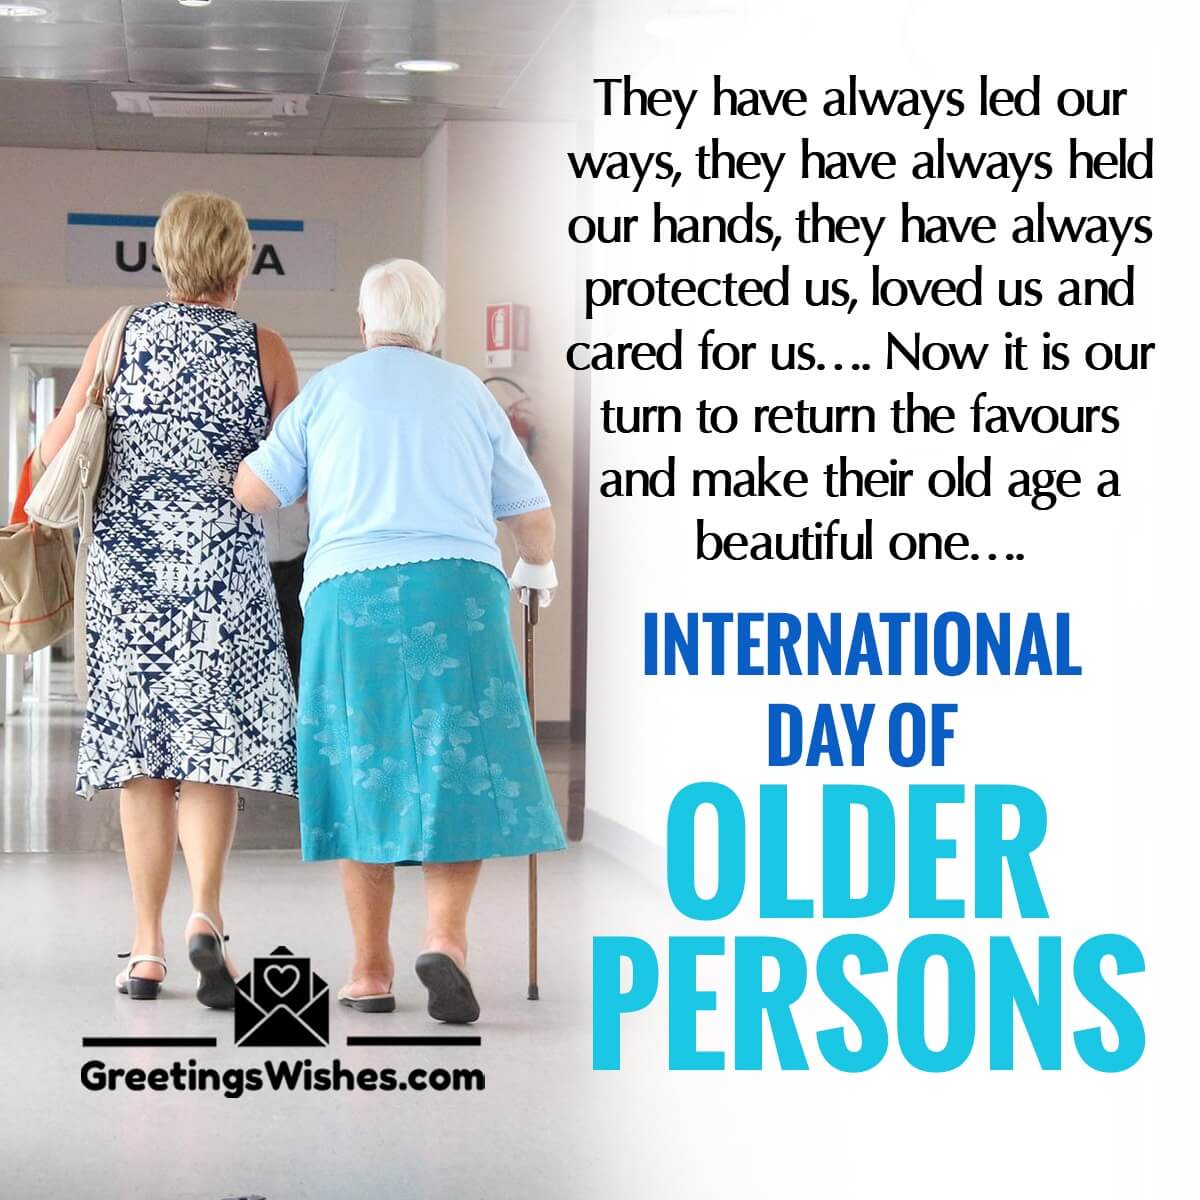 International Day Of Older Persons Message